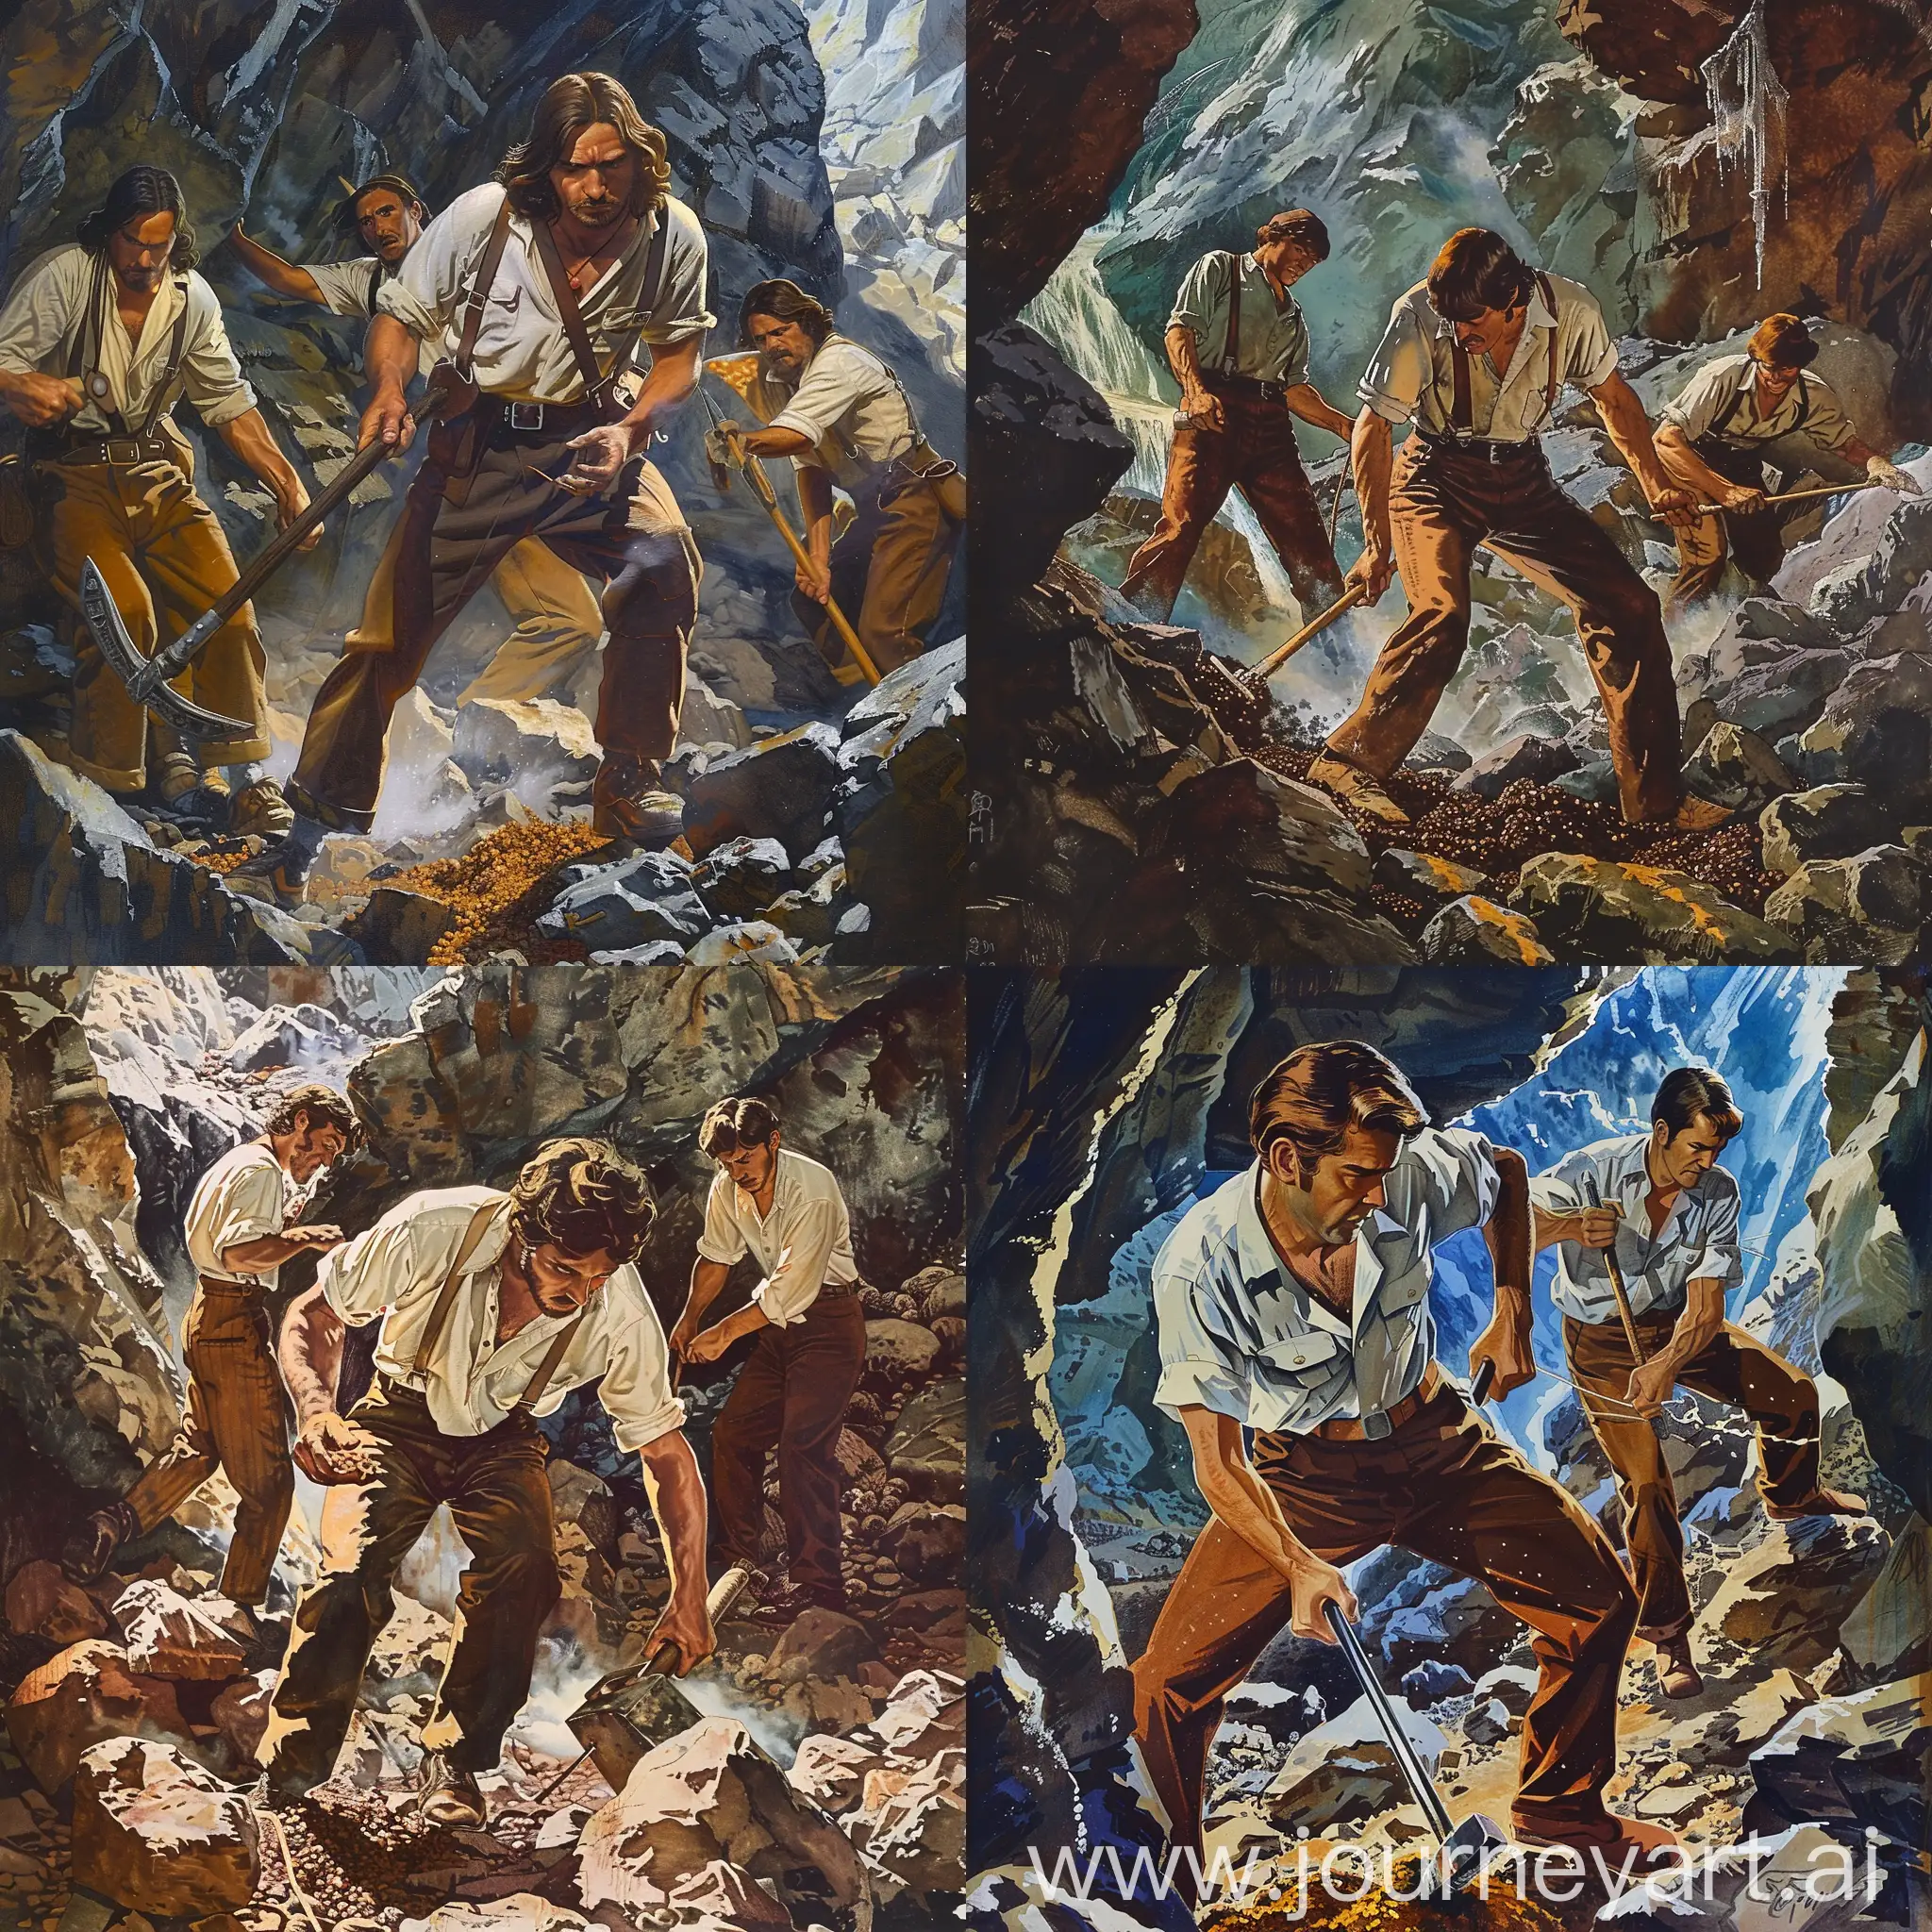 70s dark fantasy art; illustration of the men; brown hear; brown pants; white shirt; men mines ore with pickaxe; cave